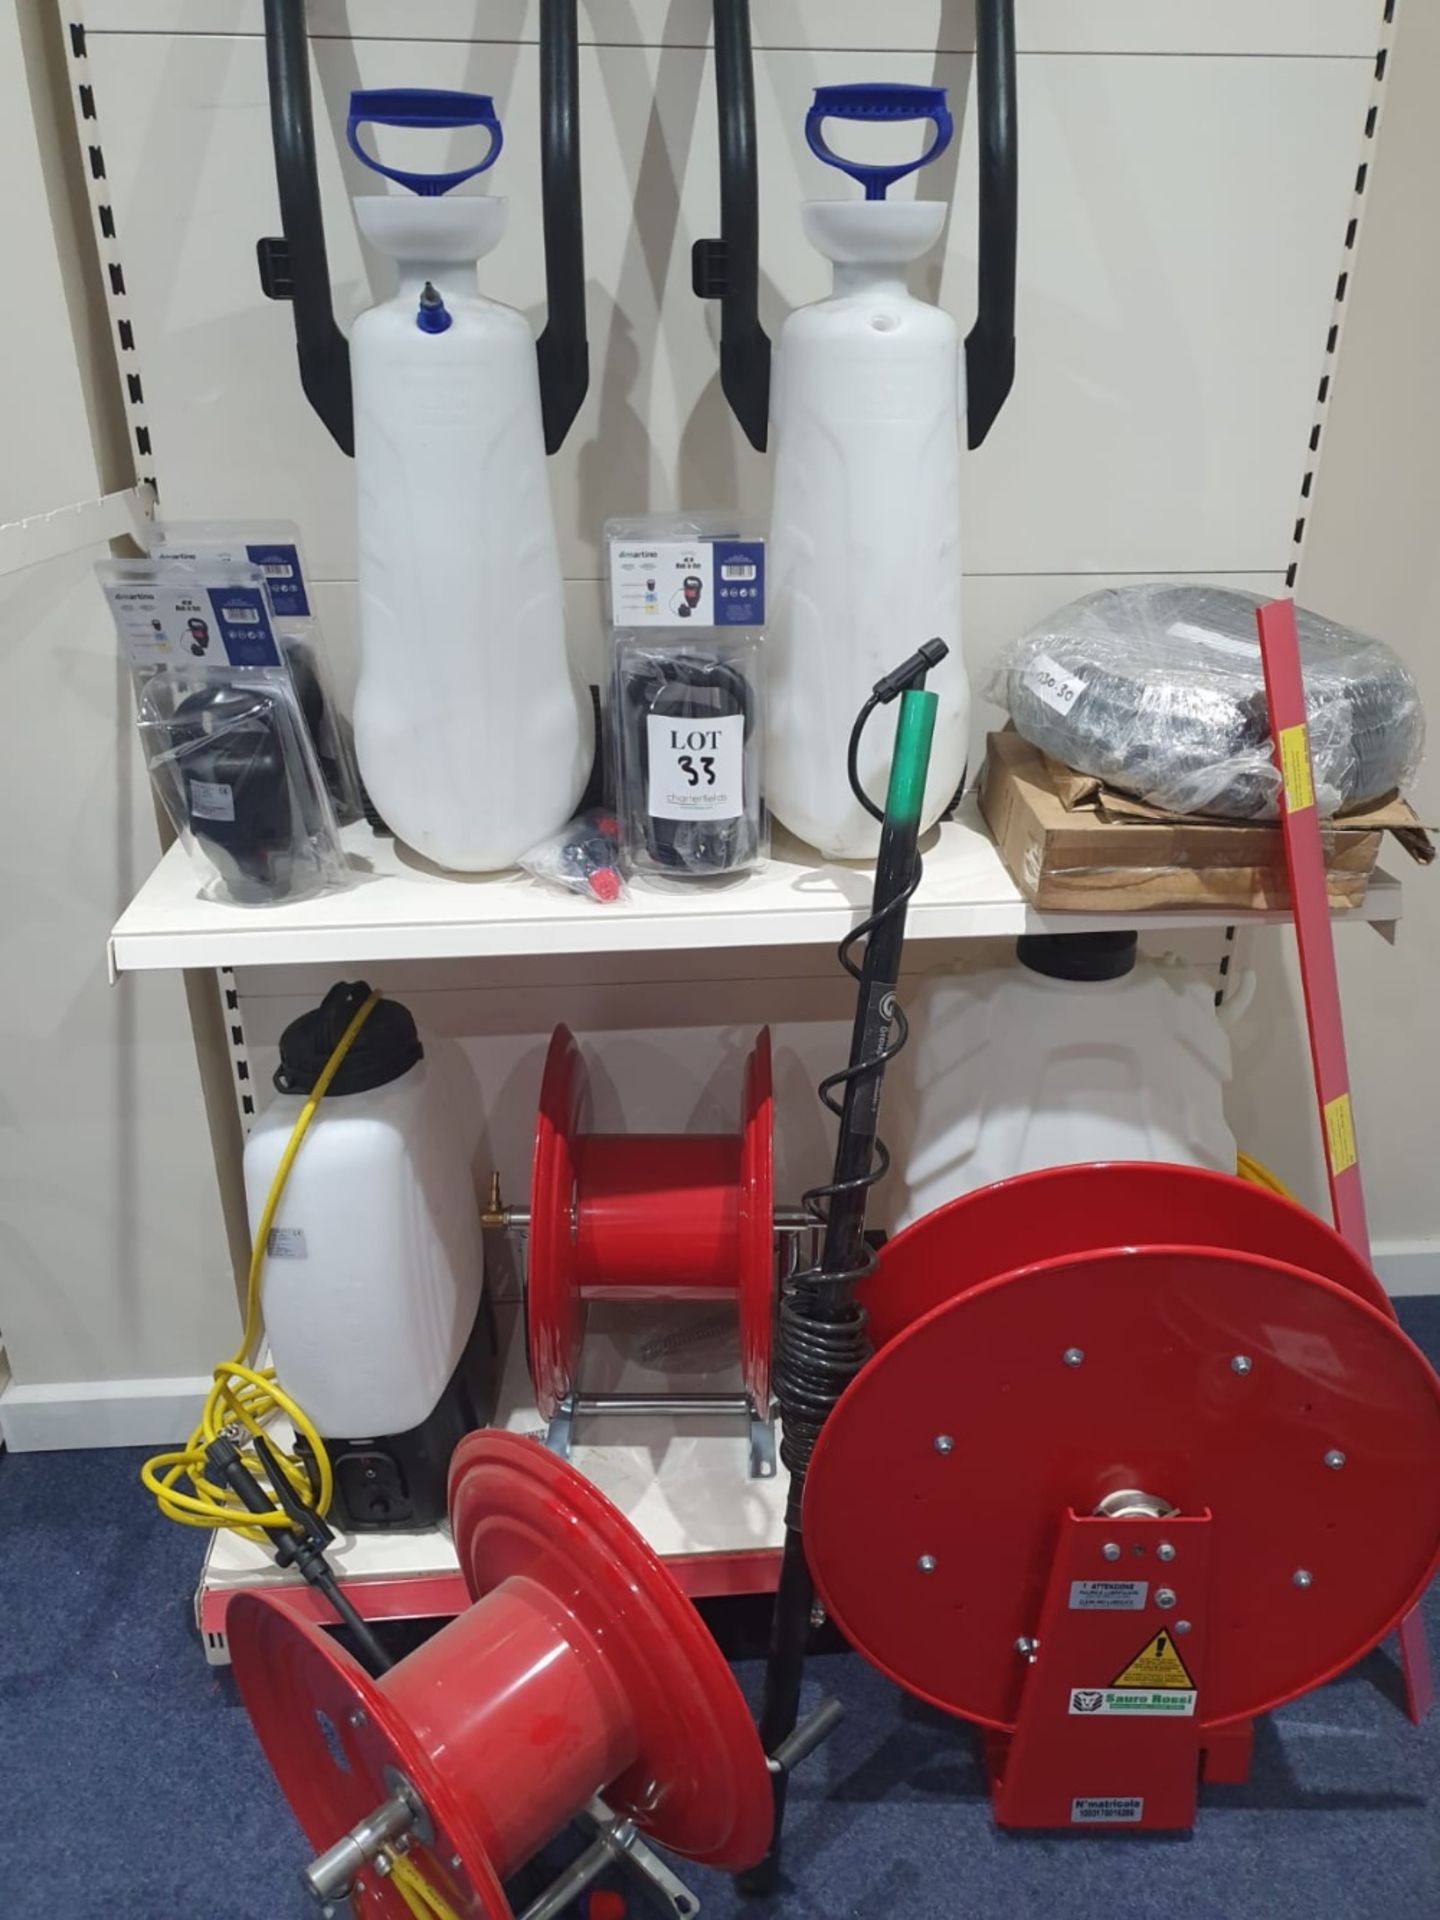 Contents of shelving to include spray pumps and reels